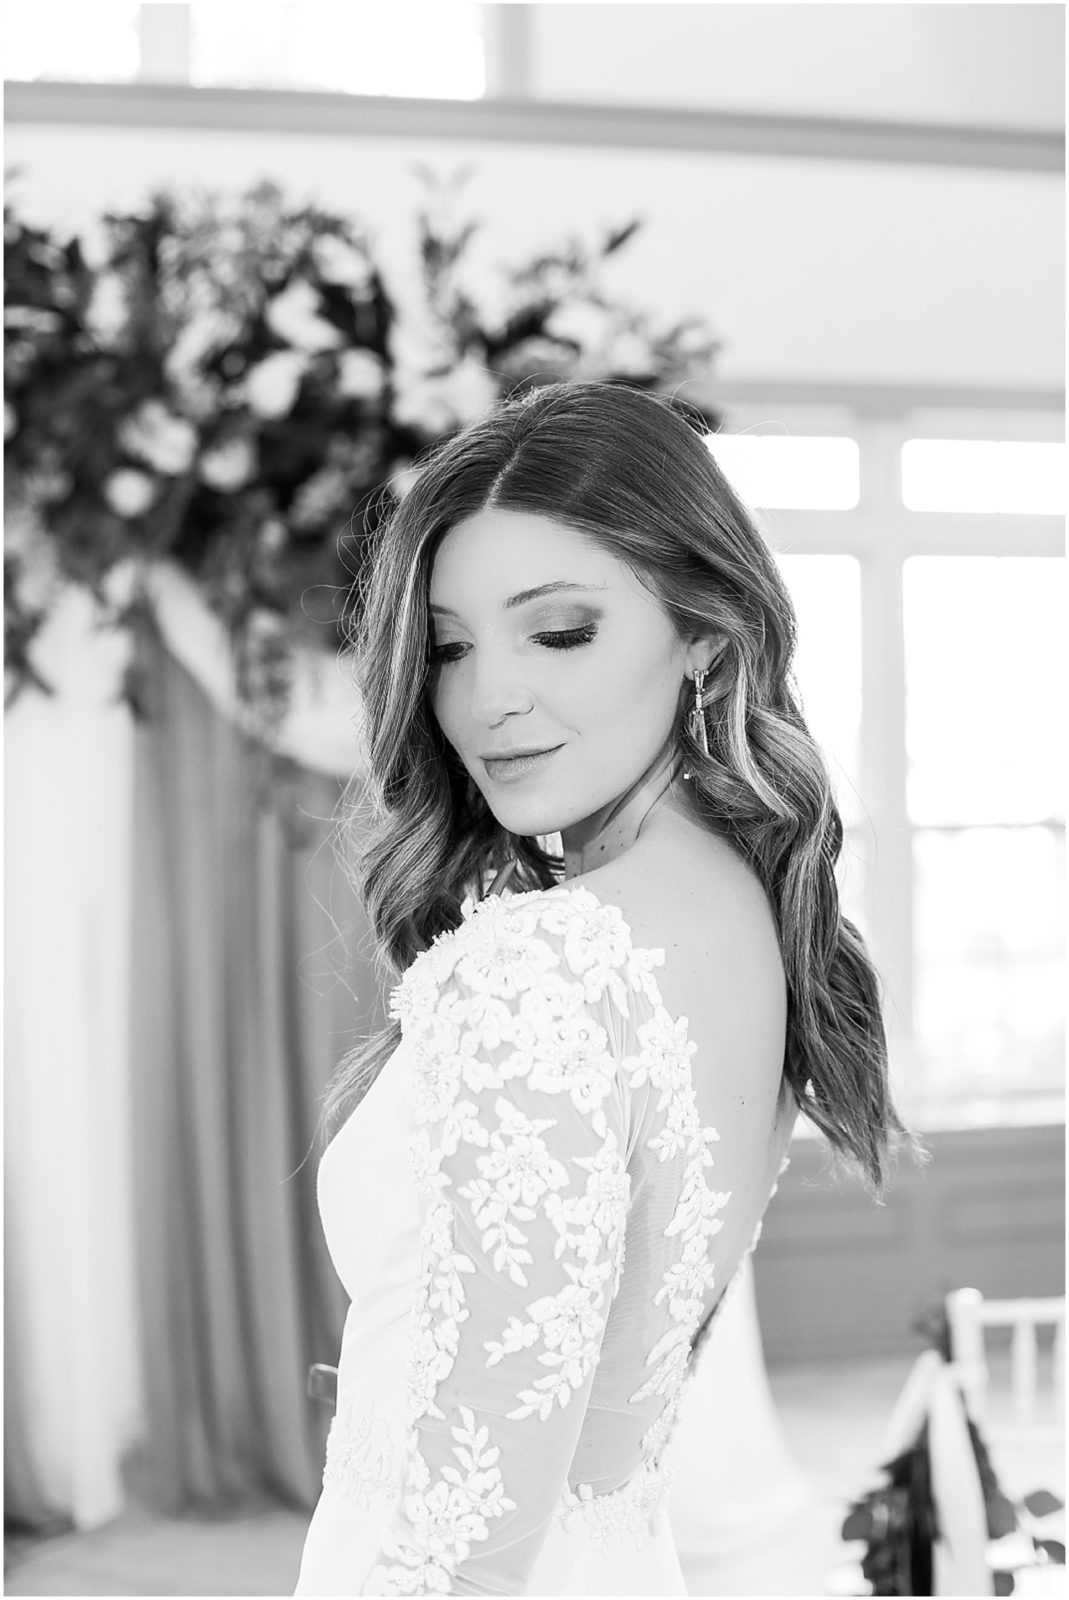 OMBRE HAIR - WEDDING HAIR - WHITE CARPET BRIDE - BRIDAL MAKE UP - 1890 - MARIAM SAIFAN PHOTOGRAPHY - WEDDING PLANNERS IN KANSAS CITY - PRETTY AND PLANNED - WEDDING VENUES 